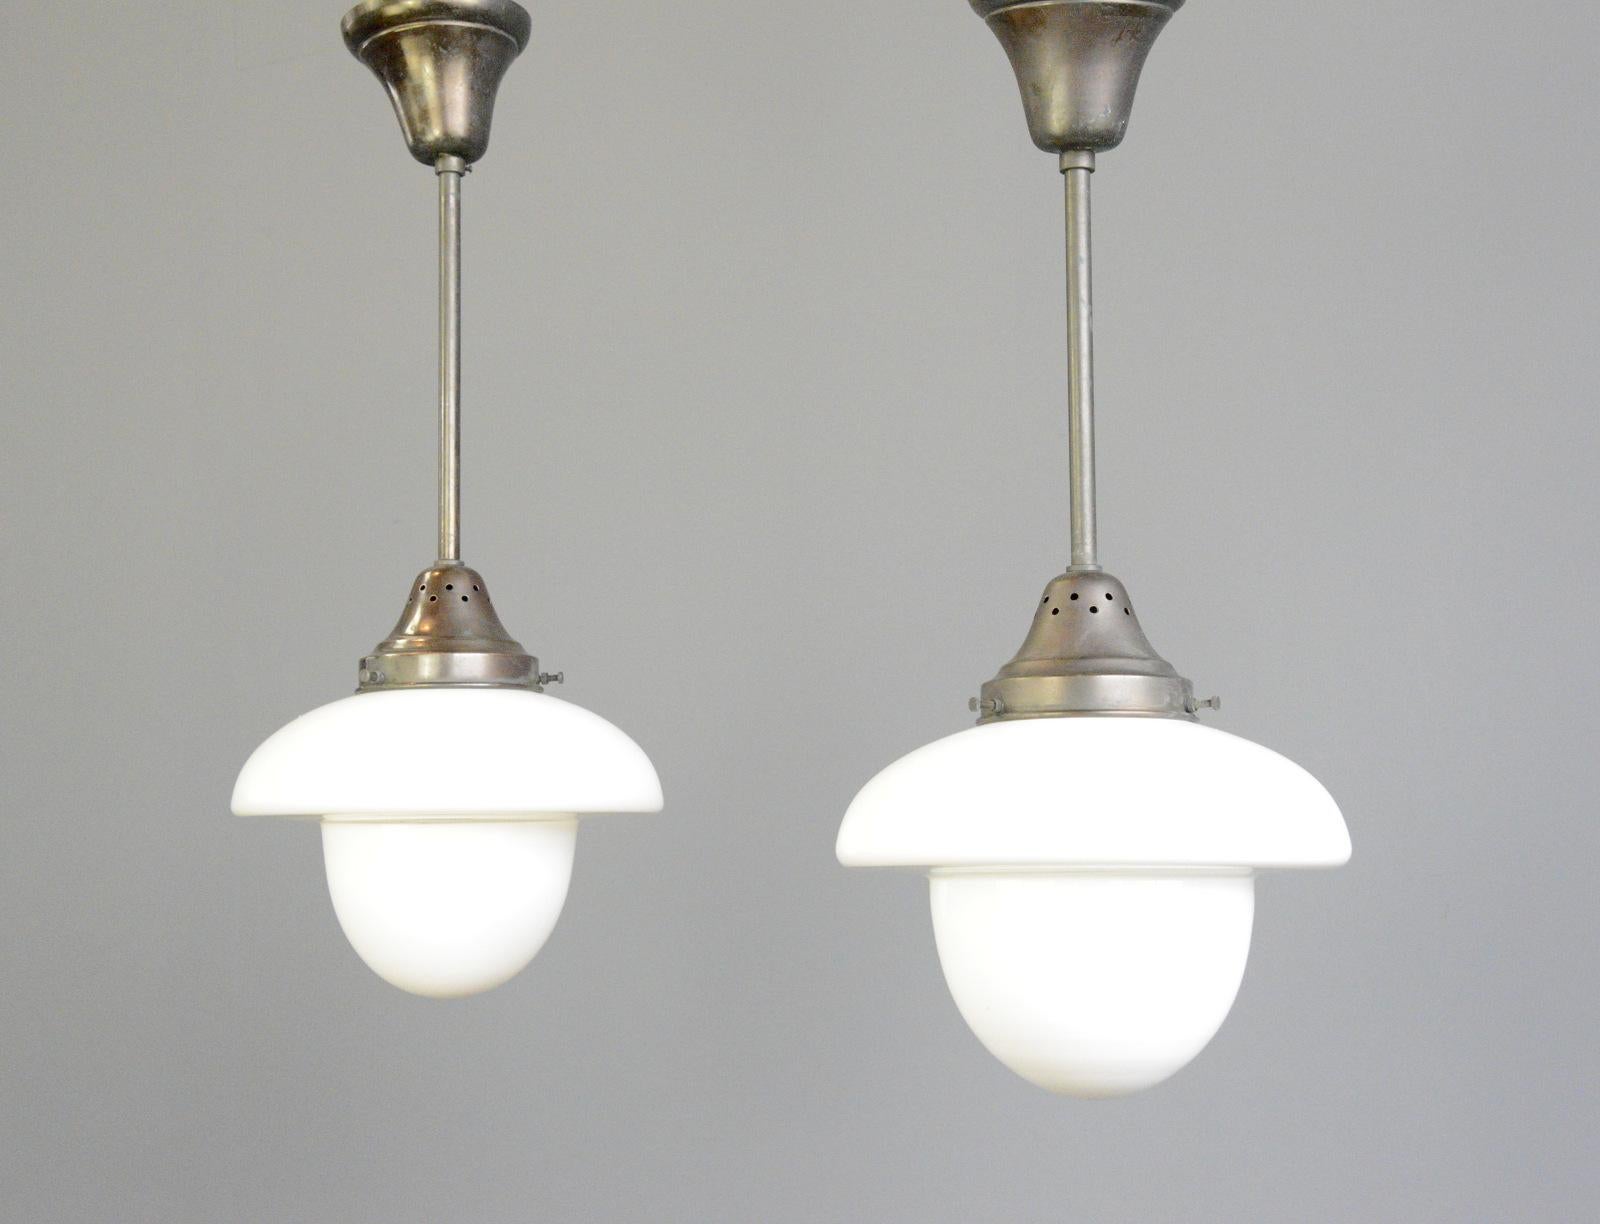 Swedish Art Deco pendant lights by Asea Circa 1920s.

- Acorn shaped Opaline and clear glass 
- Original copper tops, stems and ceiling roses
- Takes E27 fitting bulbs
- Made by Asea
- Swedish ~ 1920s
- 26cm wide x 58cm tall inc ceiling